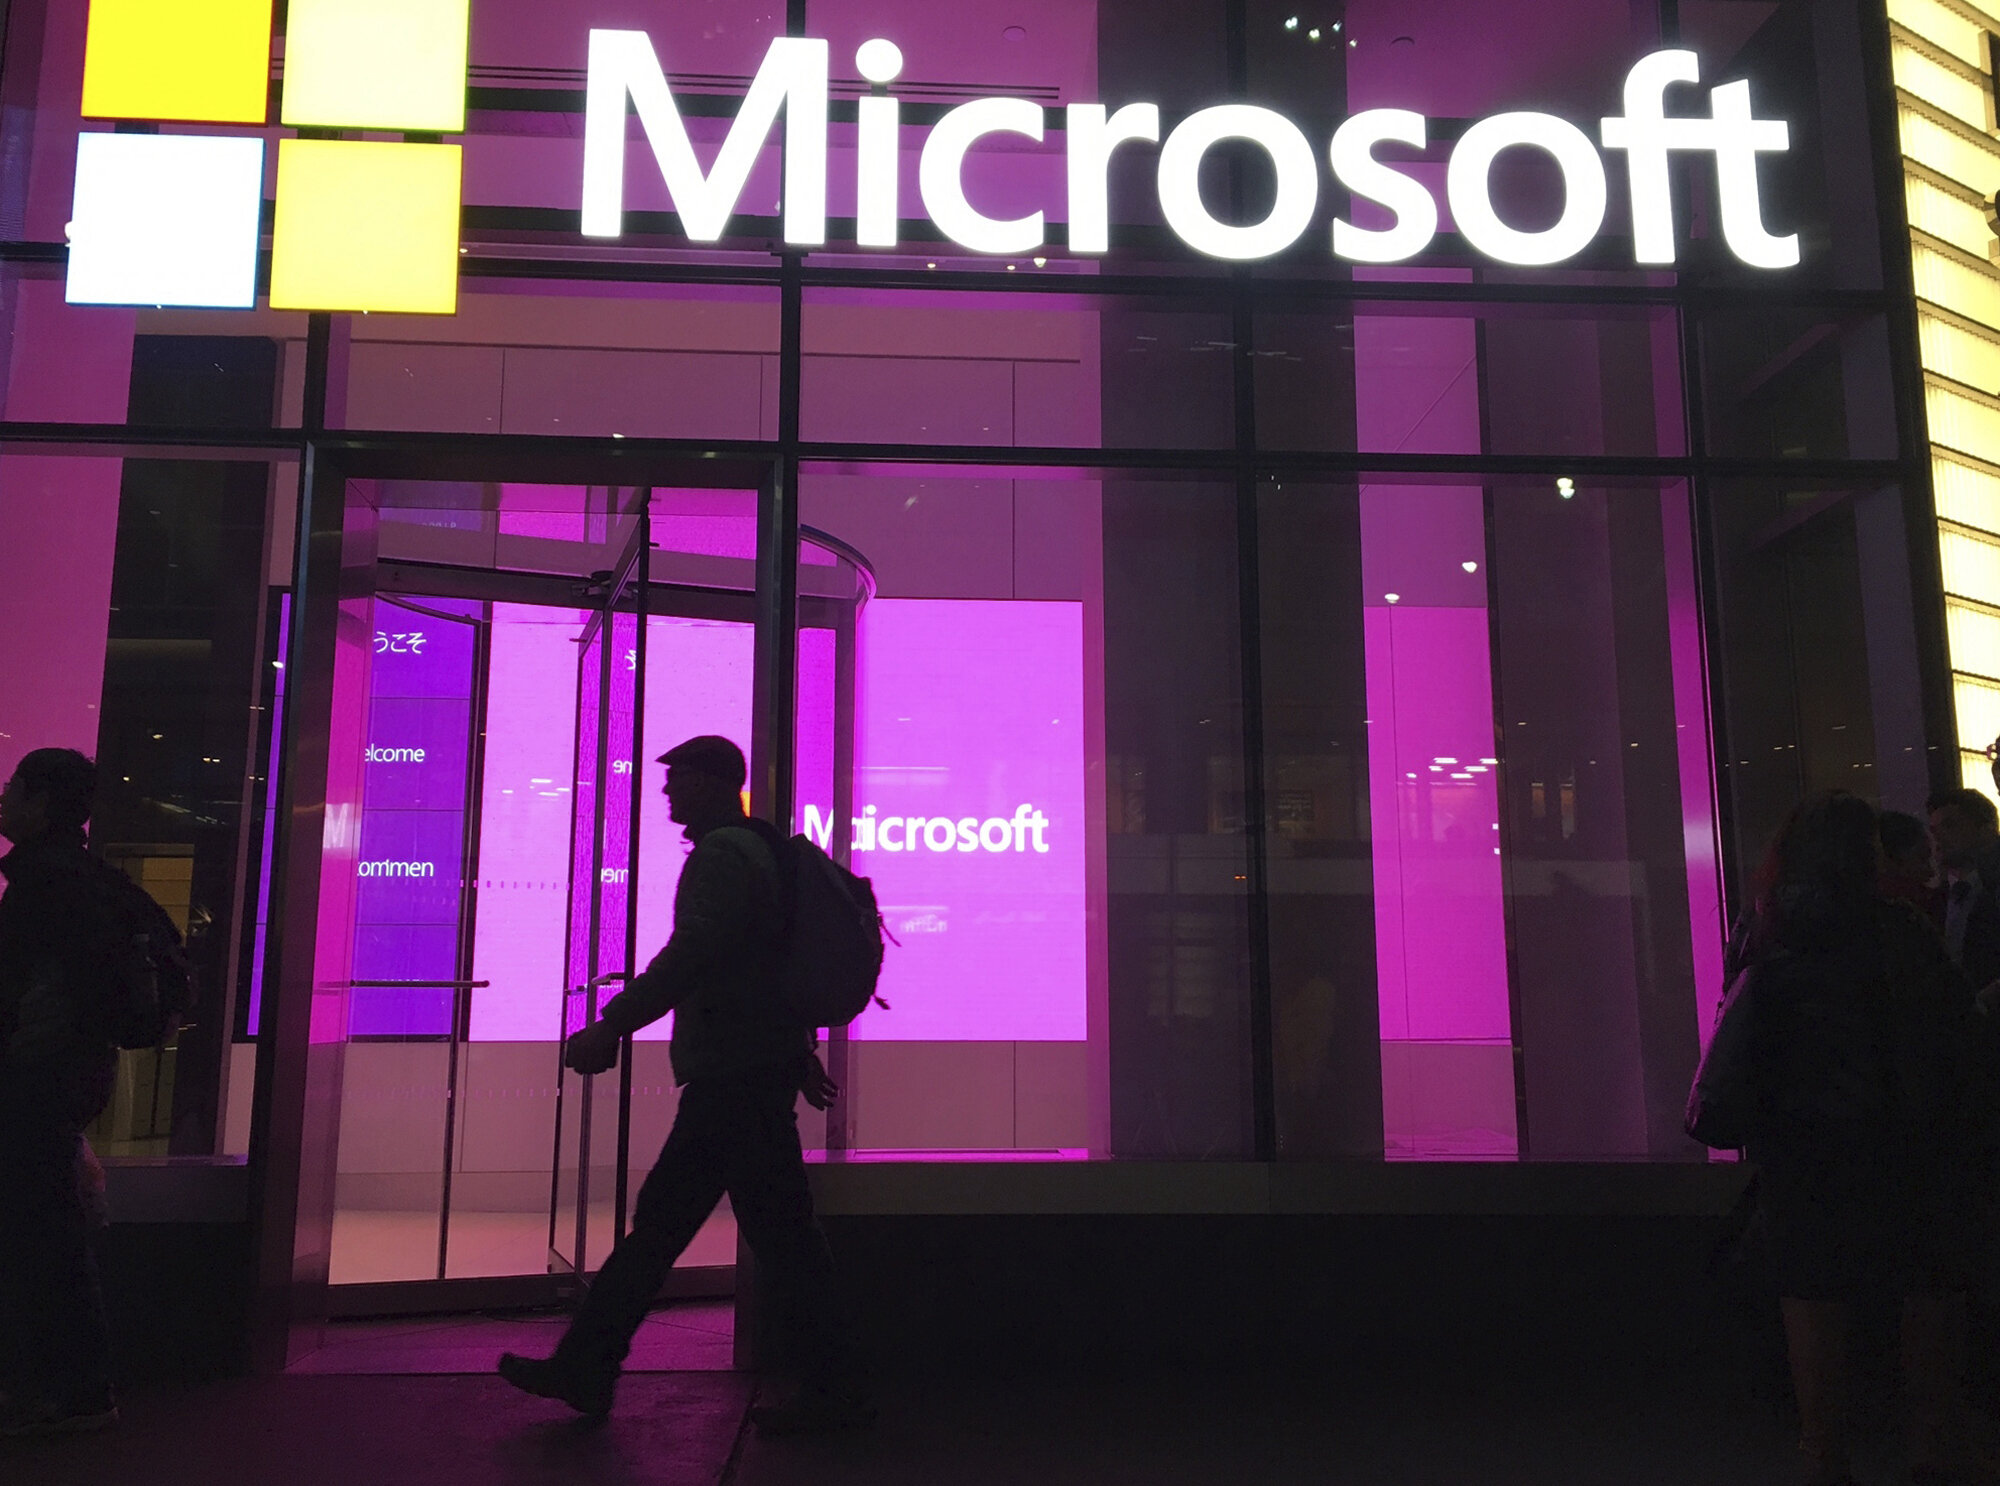 #Microsoft blames economic woes for missing profit targets